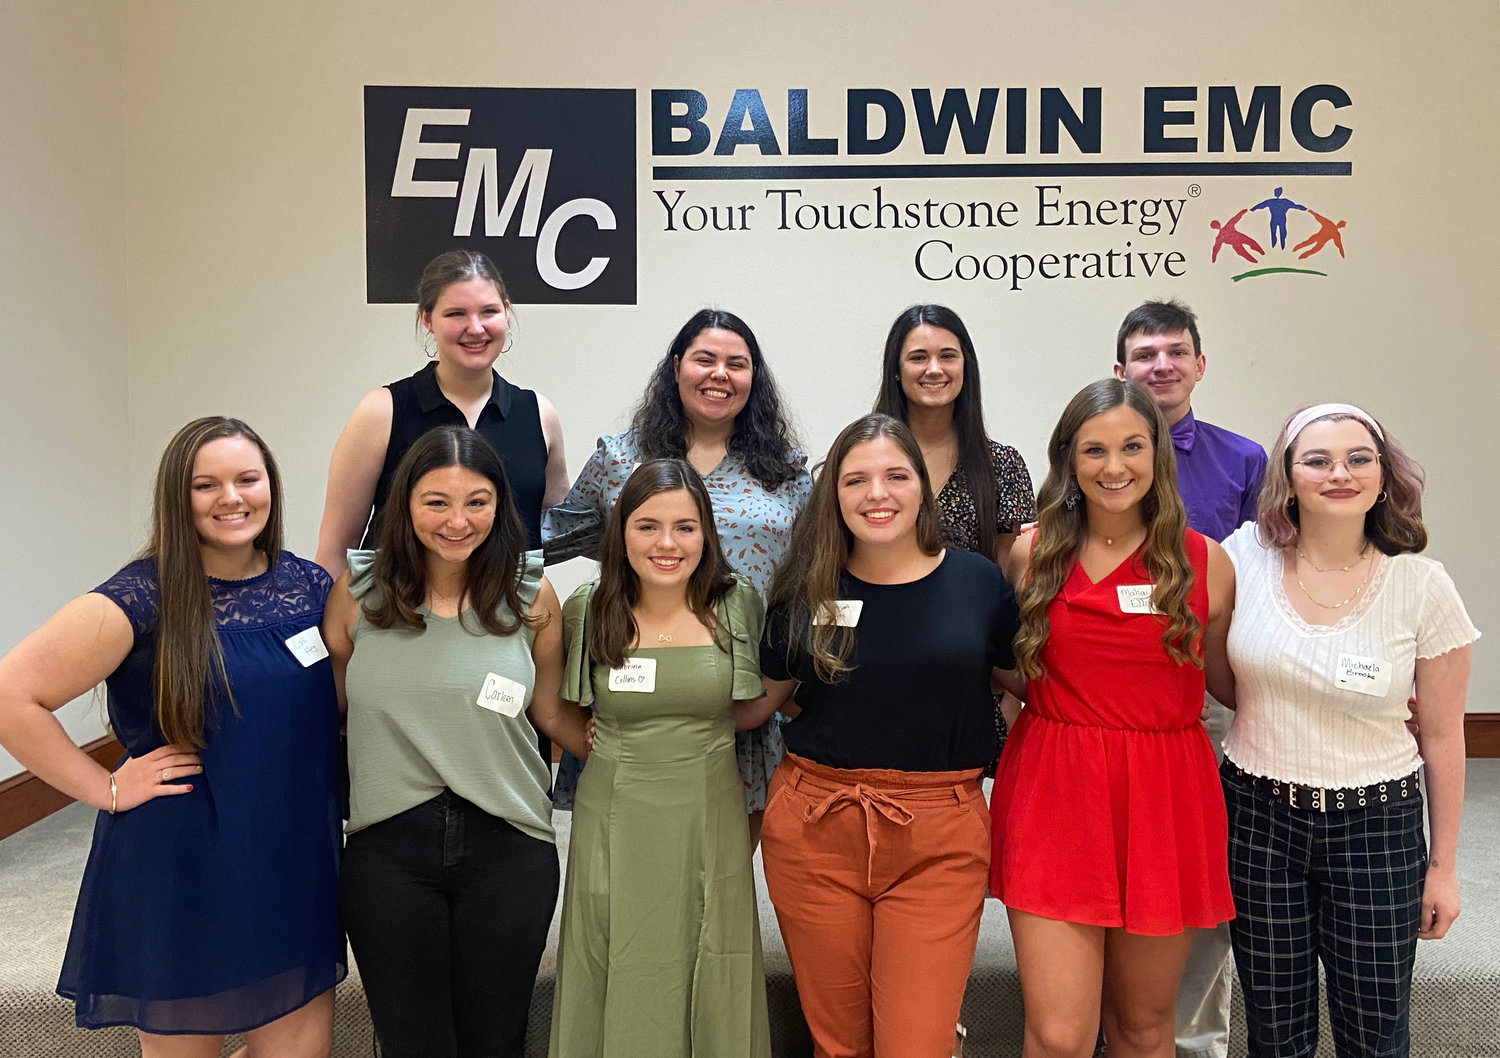 Board members from Baldwin EMC’s Charitable Foundation recently hosted a luncheon honoring this year’s Foundation scholarship winners. Pictured are the attending 2021 recipients (front row, l-r): Cali Hess, Carleen Horace, Sabrina Collins, Baleigh Collins, Malia Elliott and Michaela Brooke; (back row, l-r): Cassidy Schneider, Cairo Plauche’, Nicollette Houston-Turner and Zander Westphal.